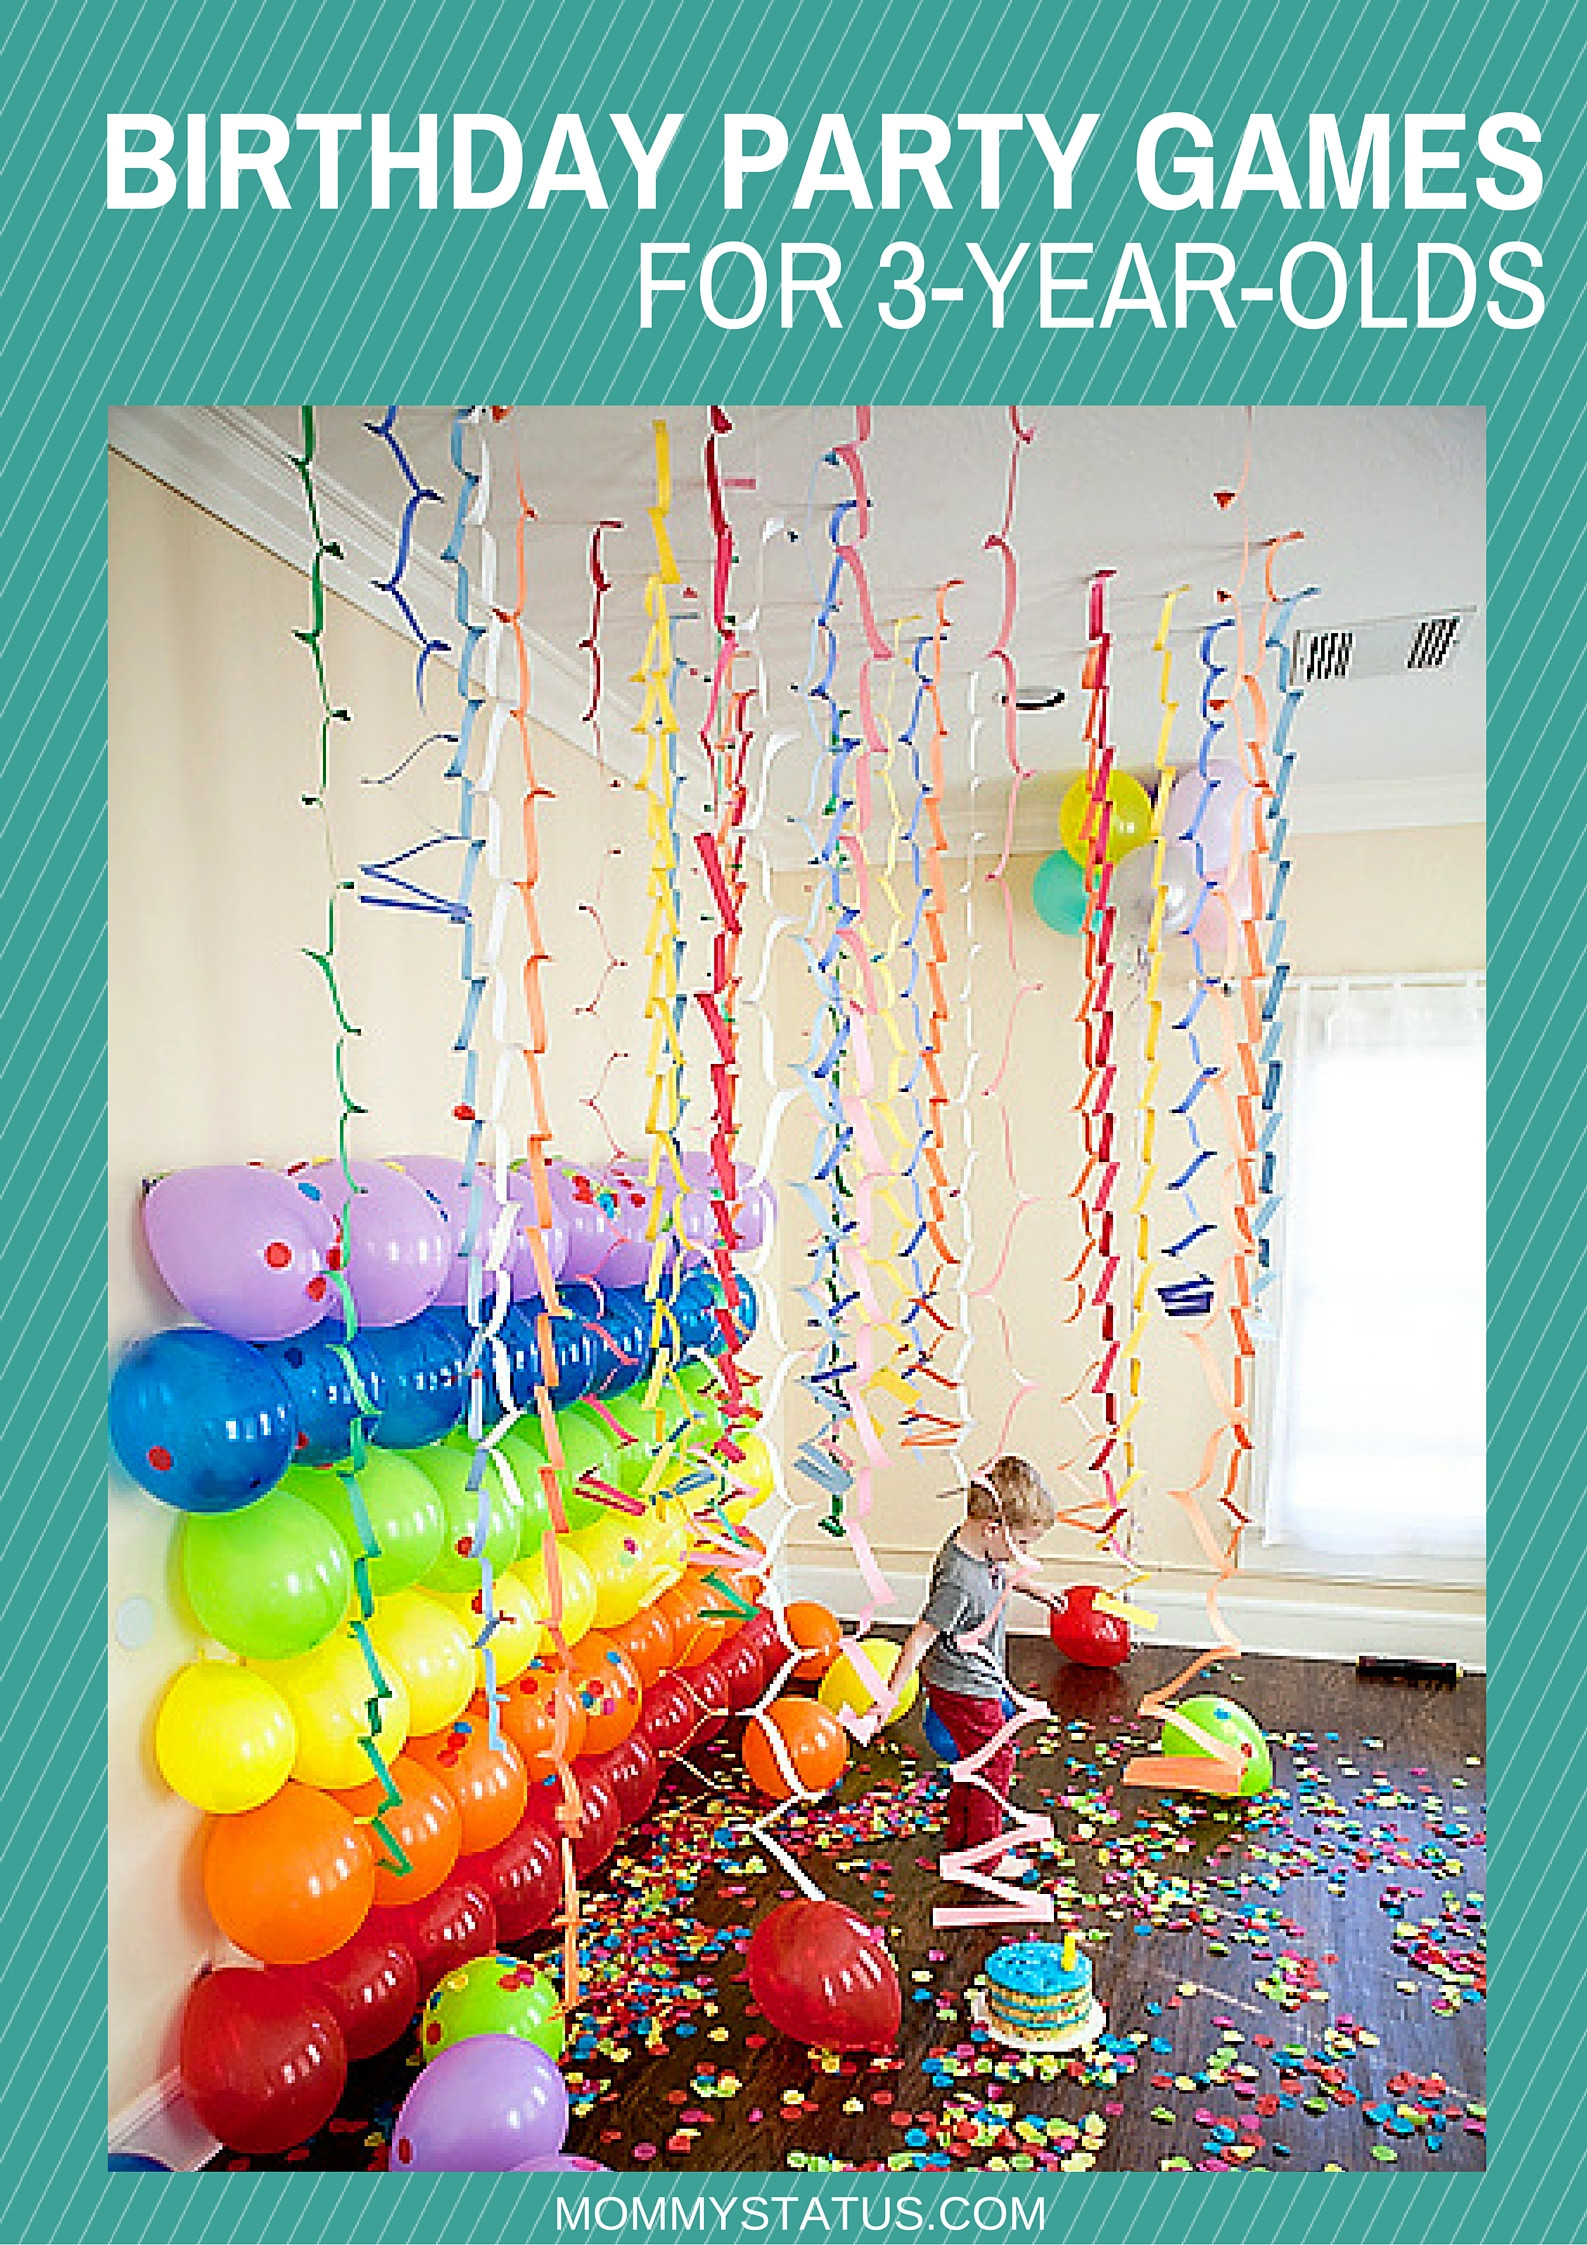 Toddler Birthday Party Ideas 3 Year Old
 BIRTHDAY PARTY GAMES FOR 3 YEAR OLDS Mommy Status